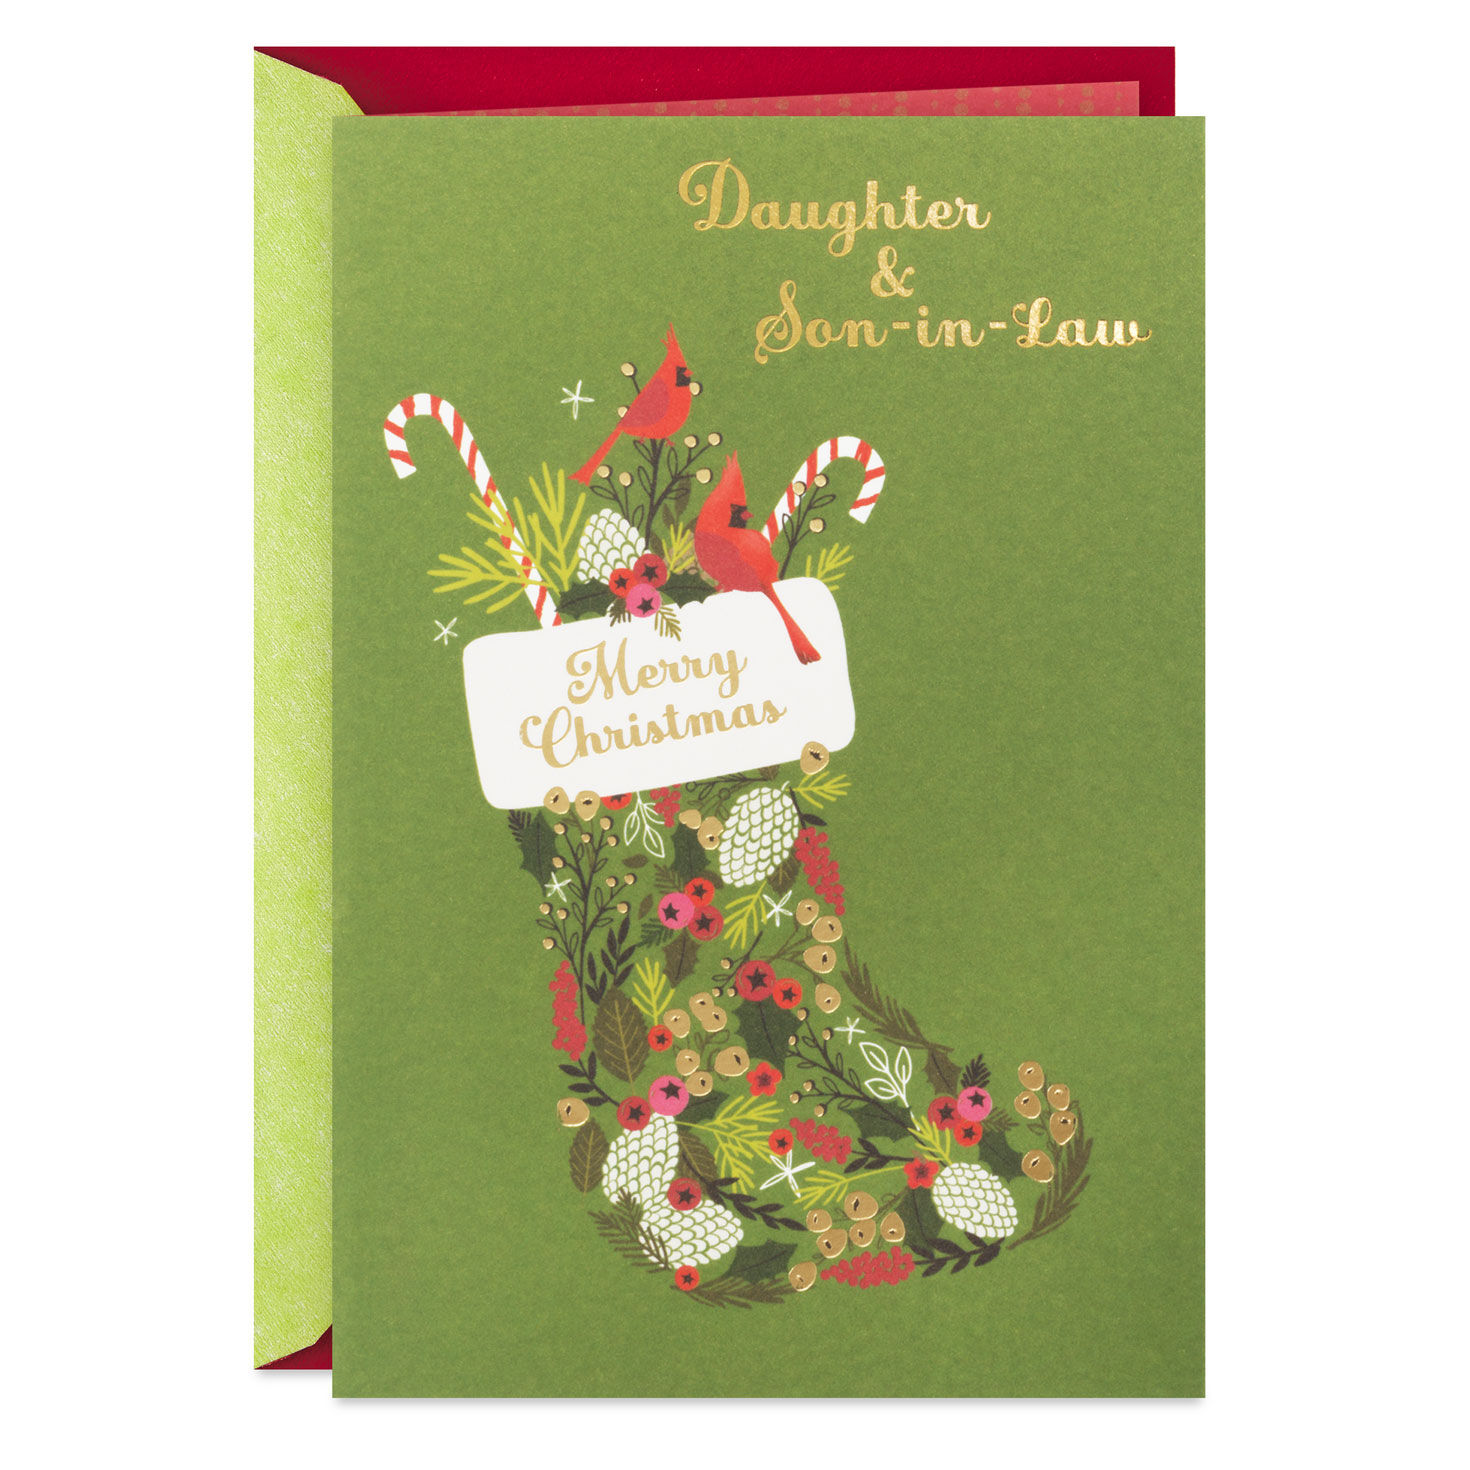 A Family Who Loves You Christmas Card for Daughter and Son-in-Law for only USD 2.99 | Hallmark